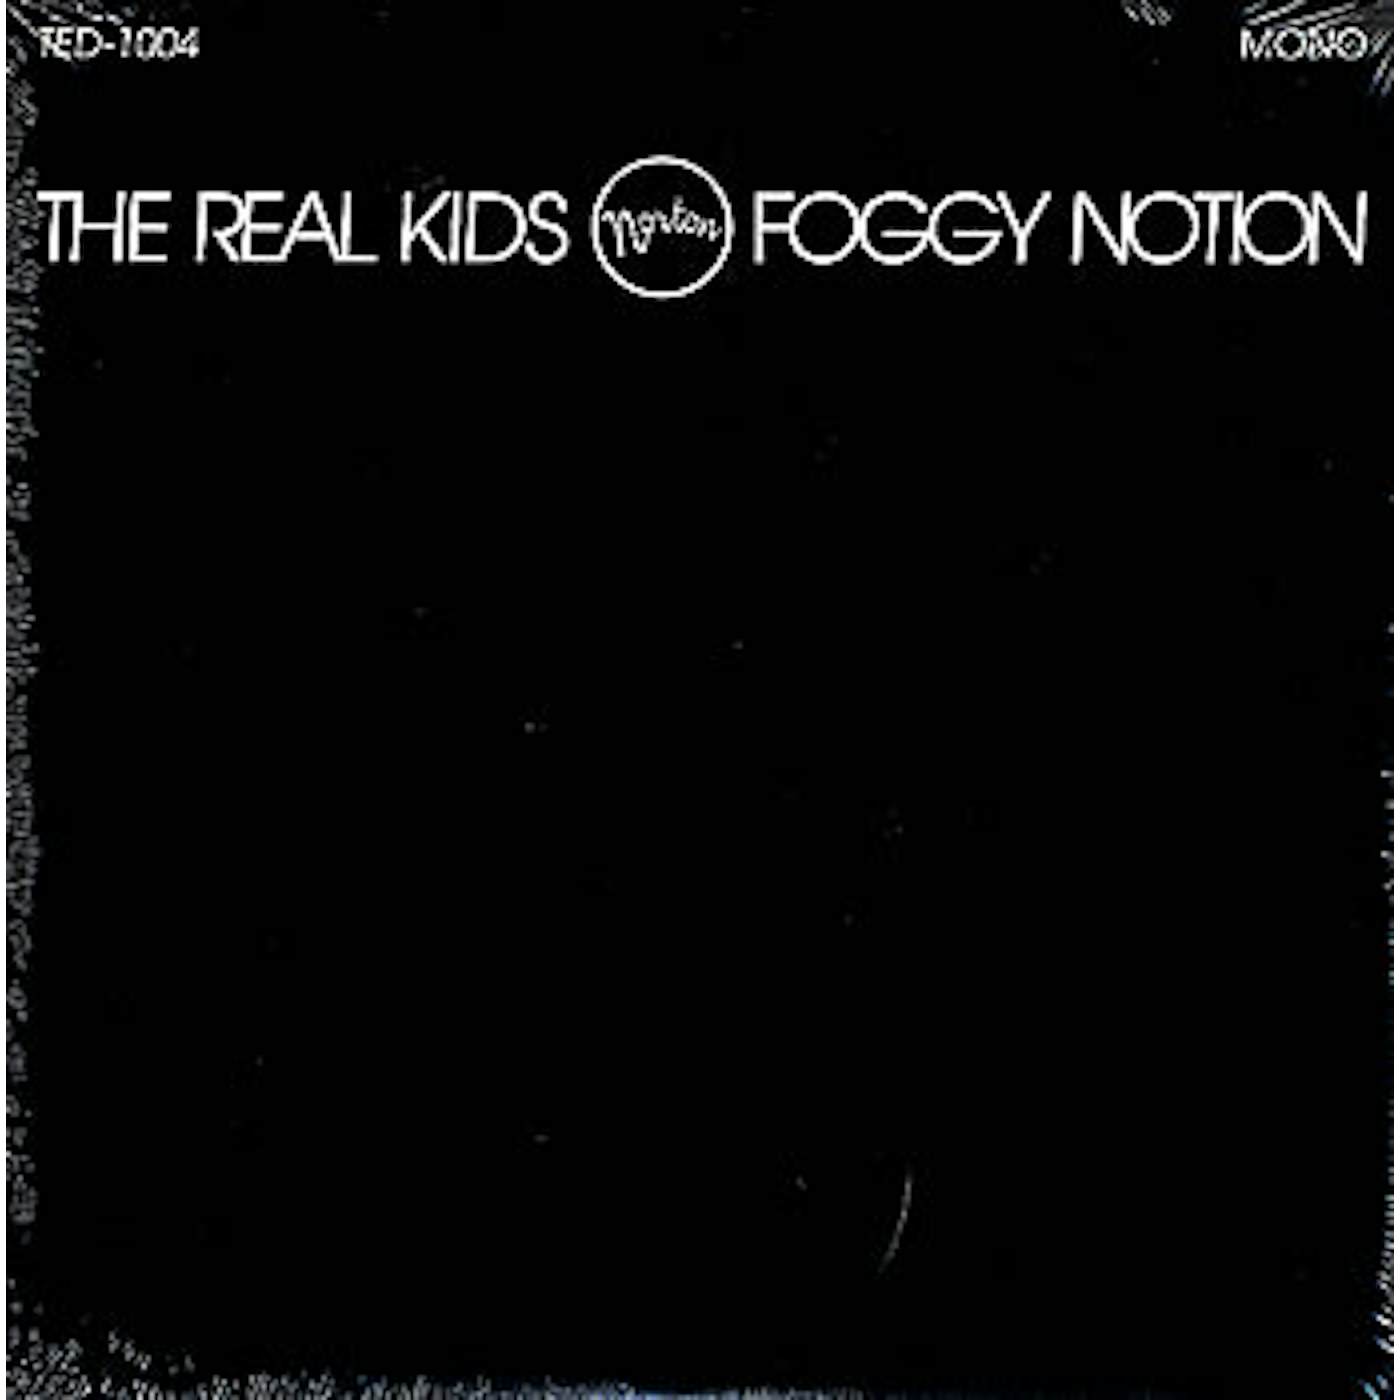 The Real Kids FOGGY NOTION Vinyl Record